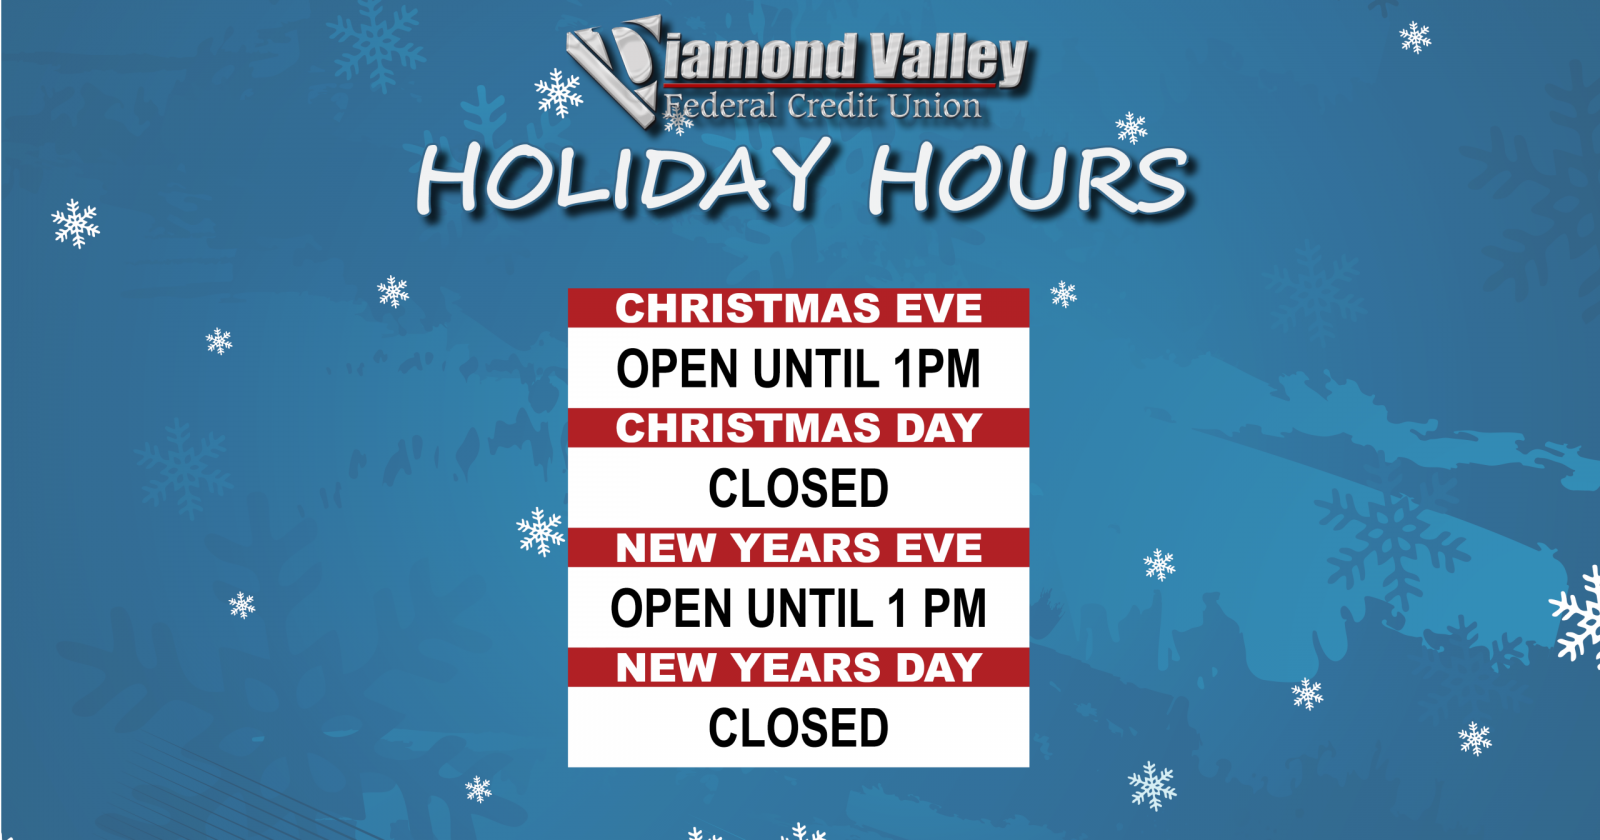 DVFCU Holiday Hours - Christmas & New Years